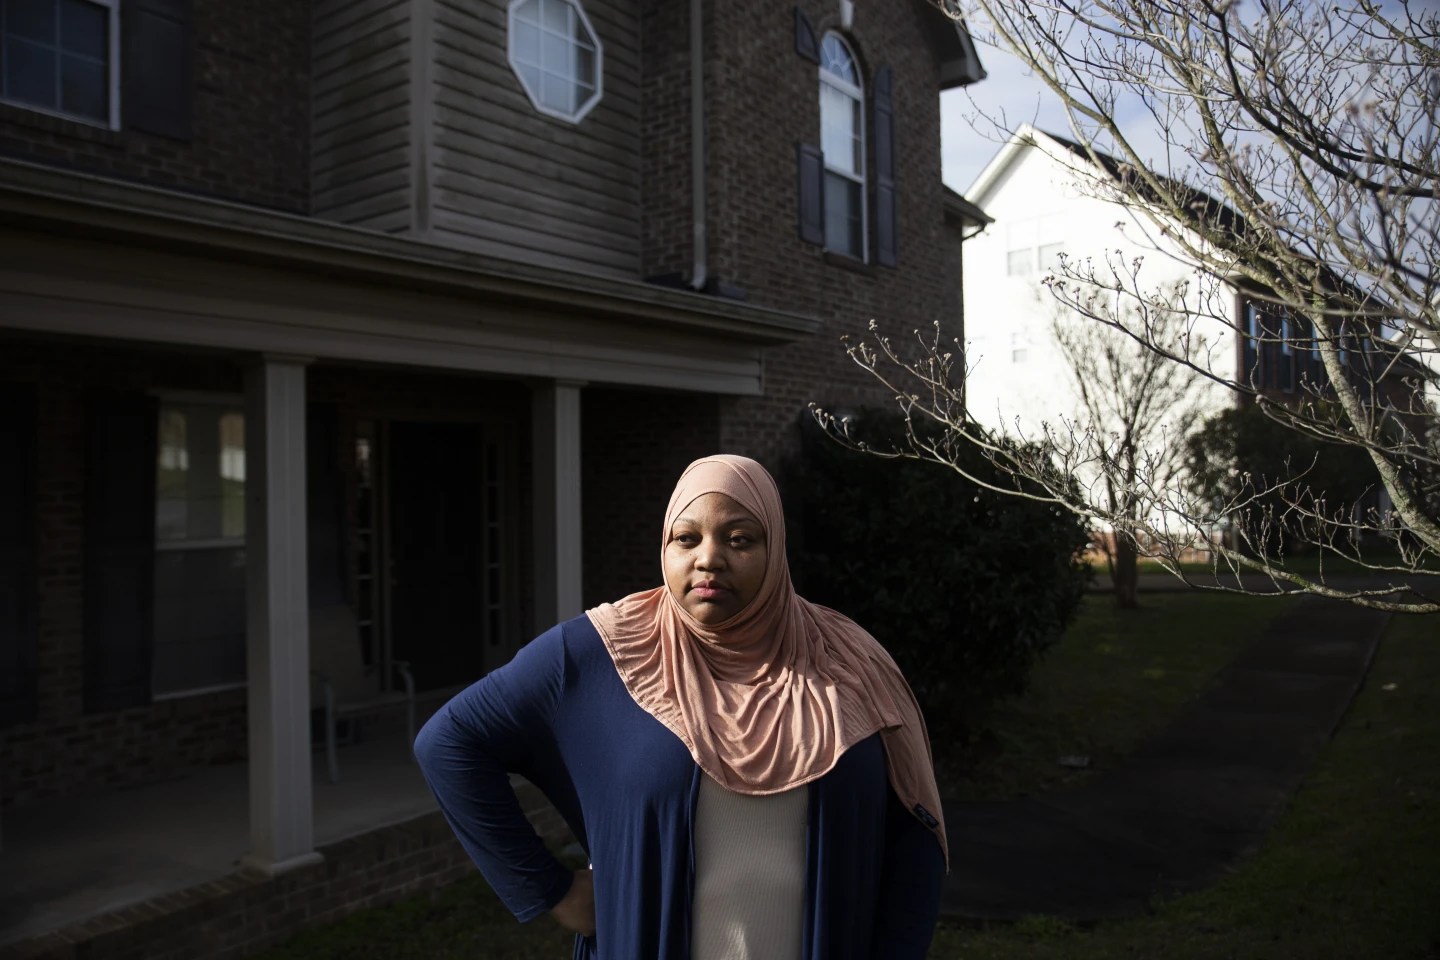 Medicaid tries to force sale of home Black mom bought with cash from discrimination suit